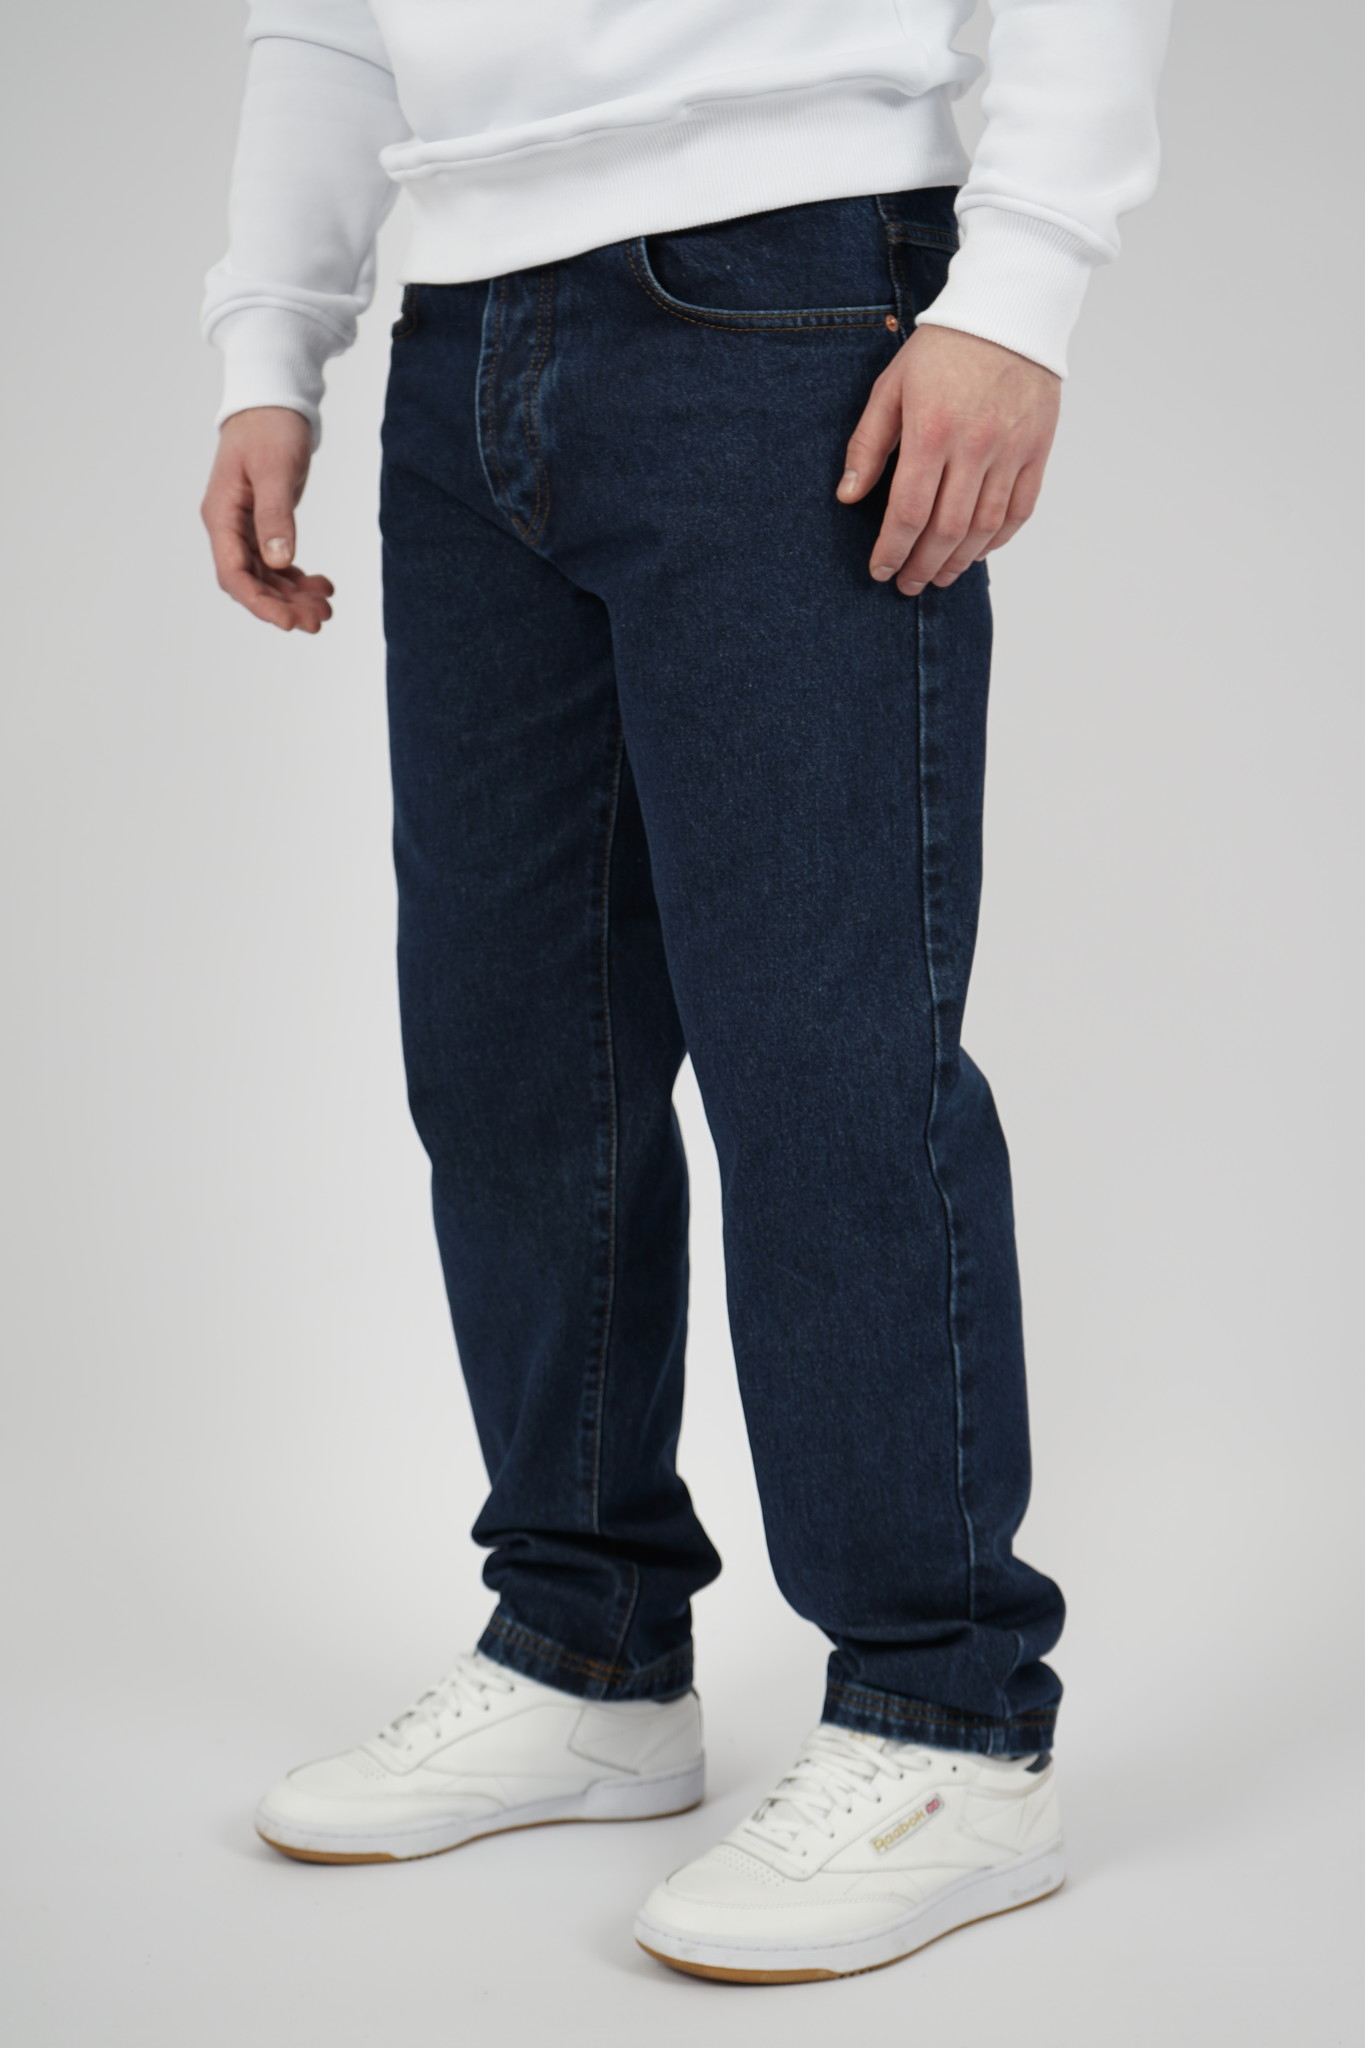 PICALDI® Zicco 472 Jeans EL PATRON | Loose & Relaxed Fit